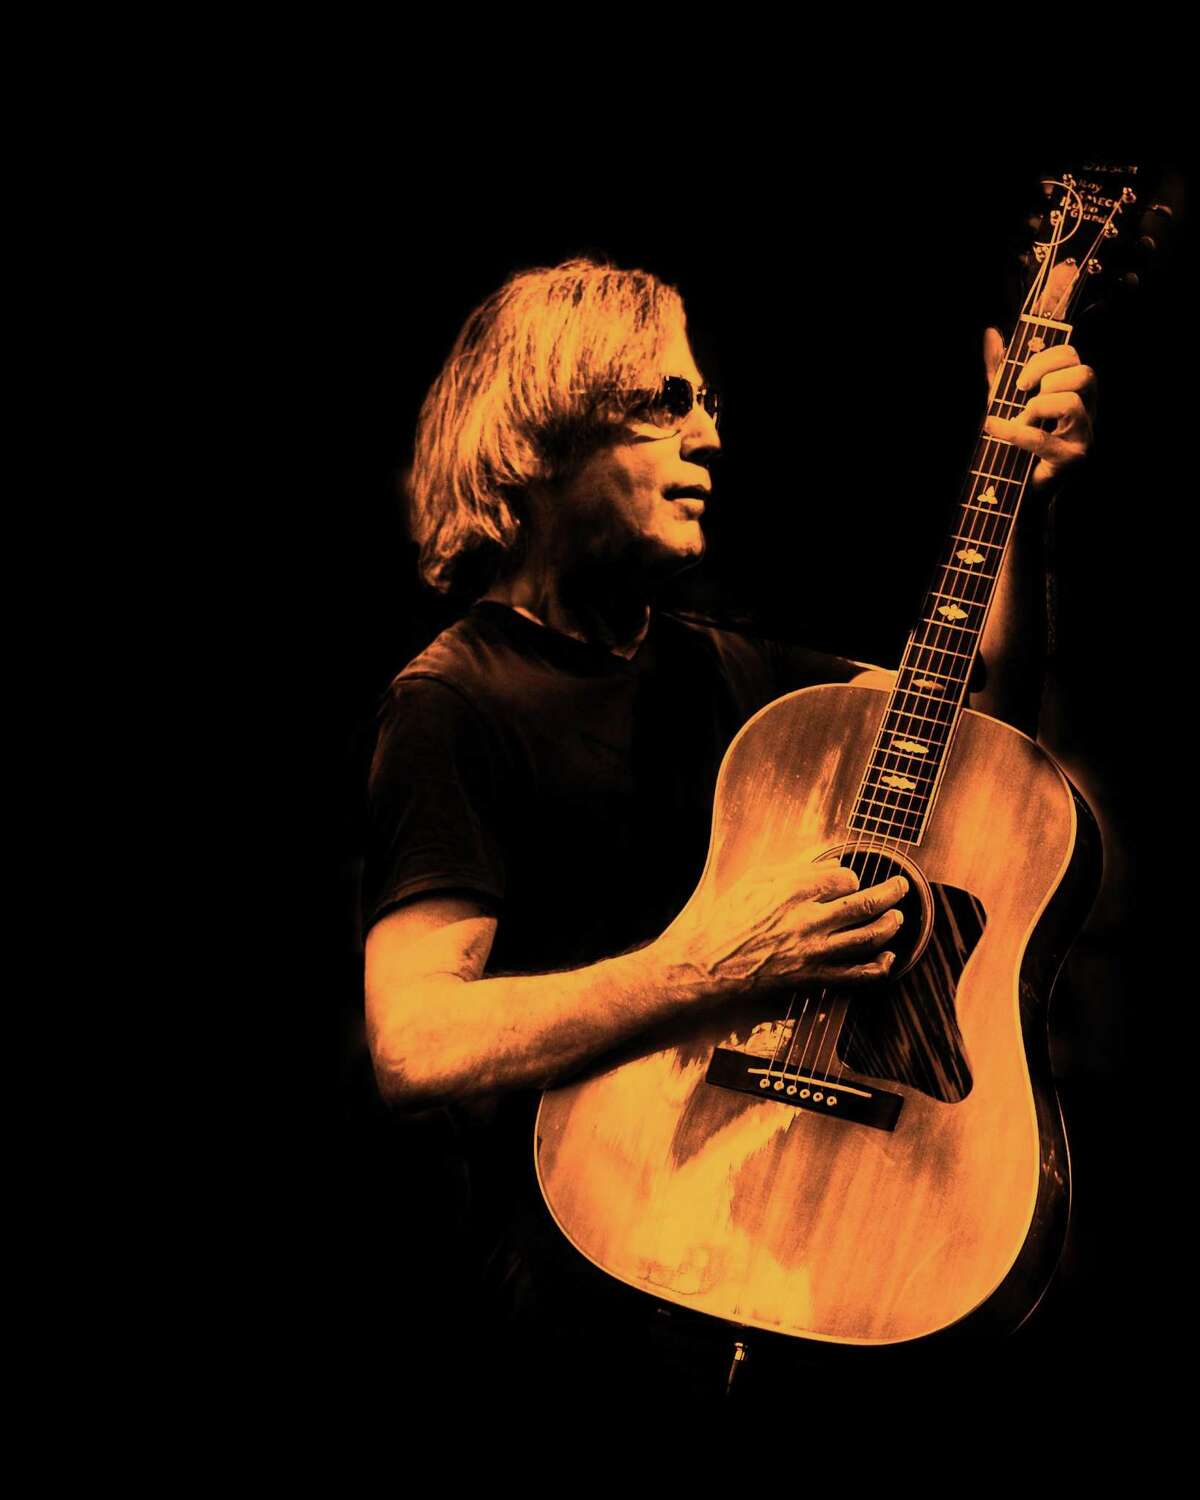 Jackson Browne performs at Toyota Oakdale Theatre in Wallingford on May 10.